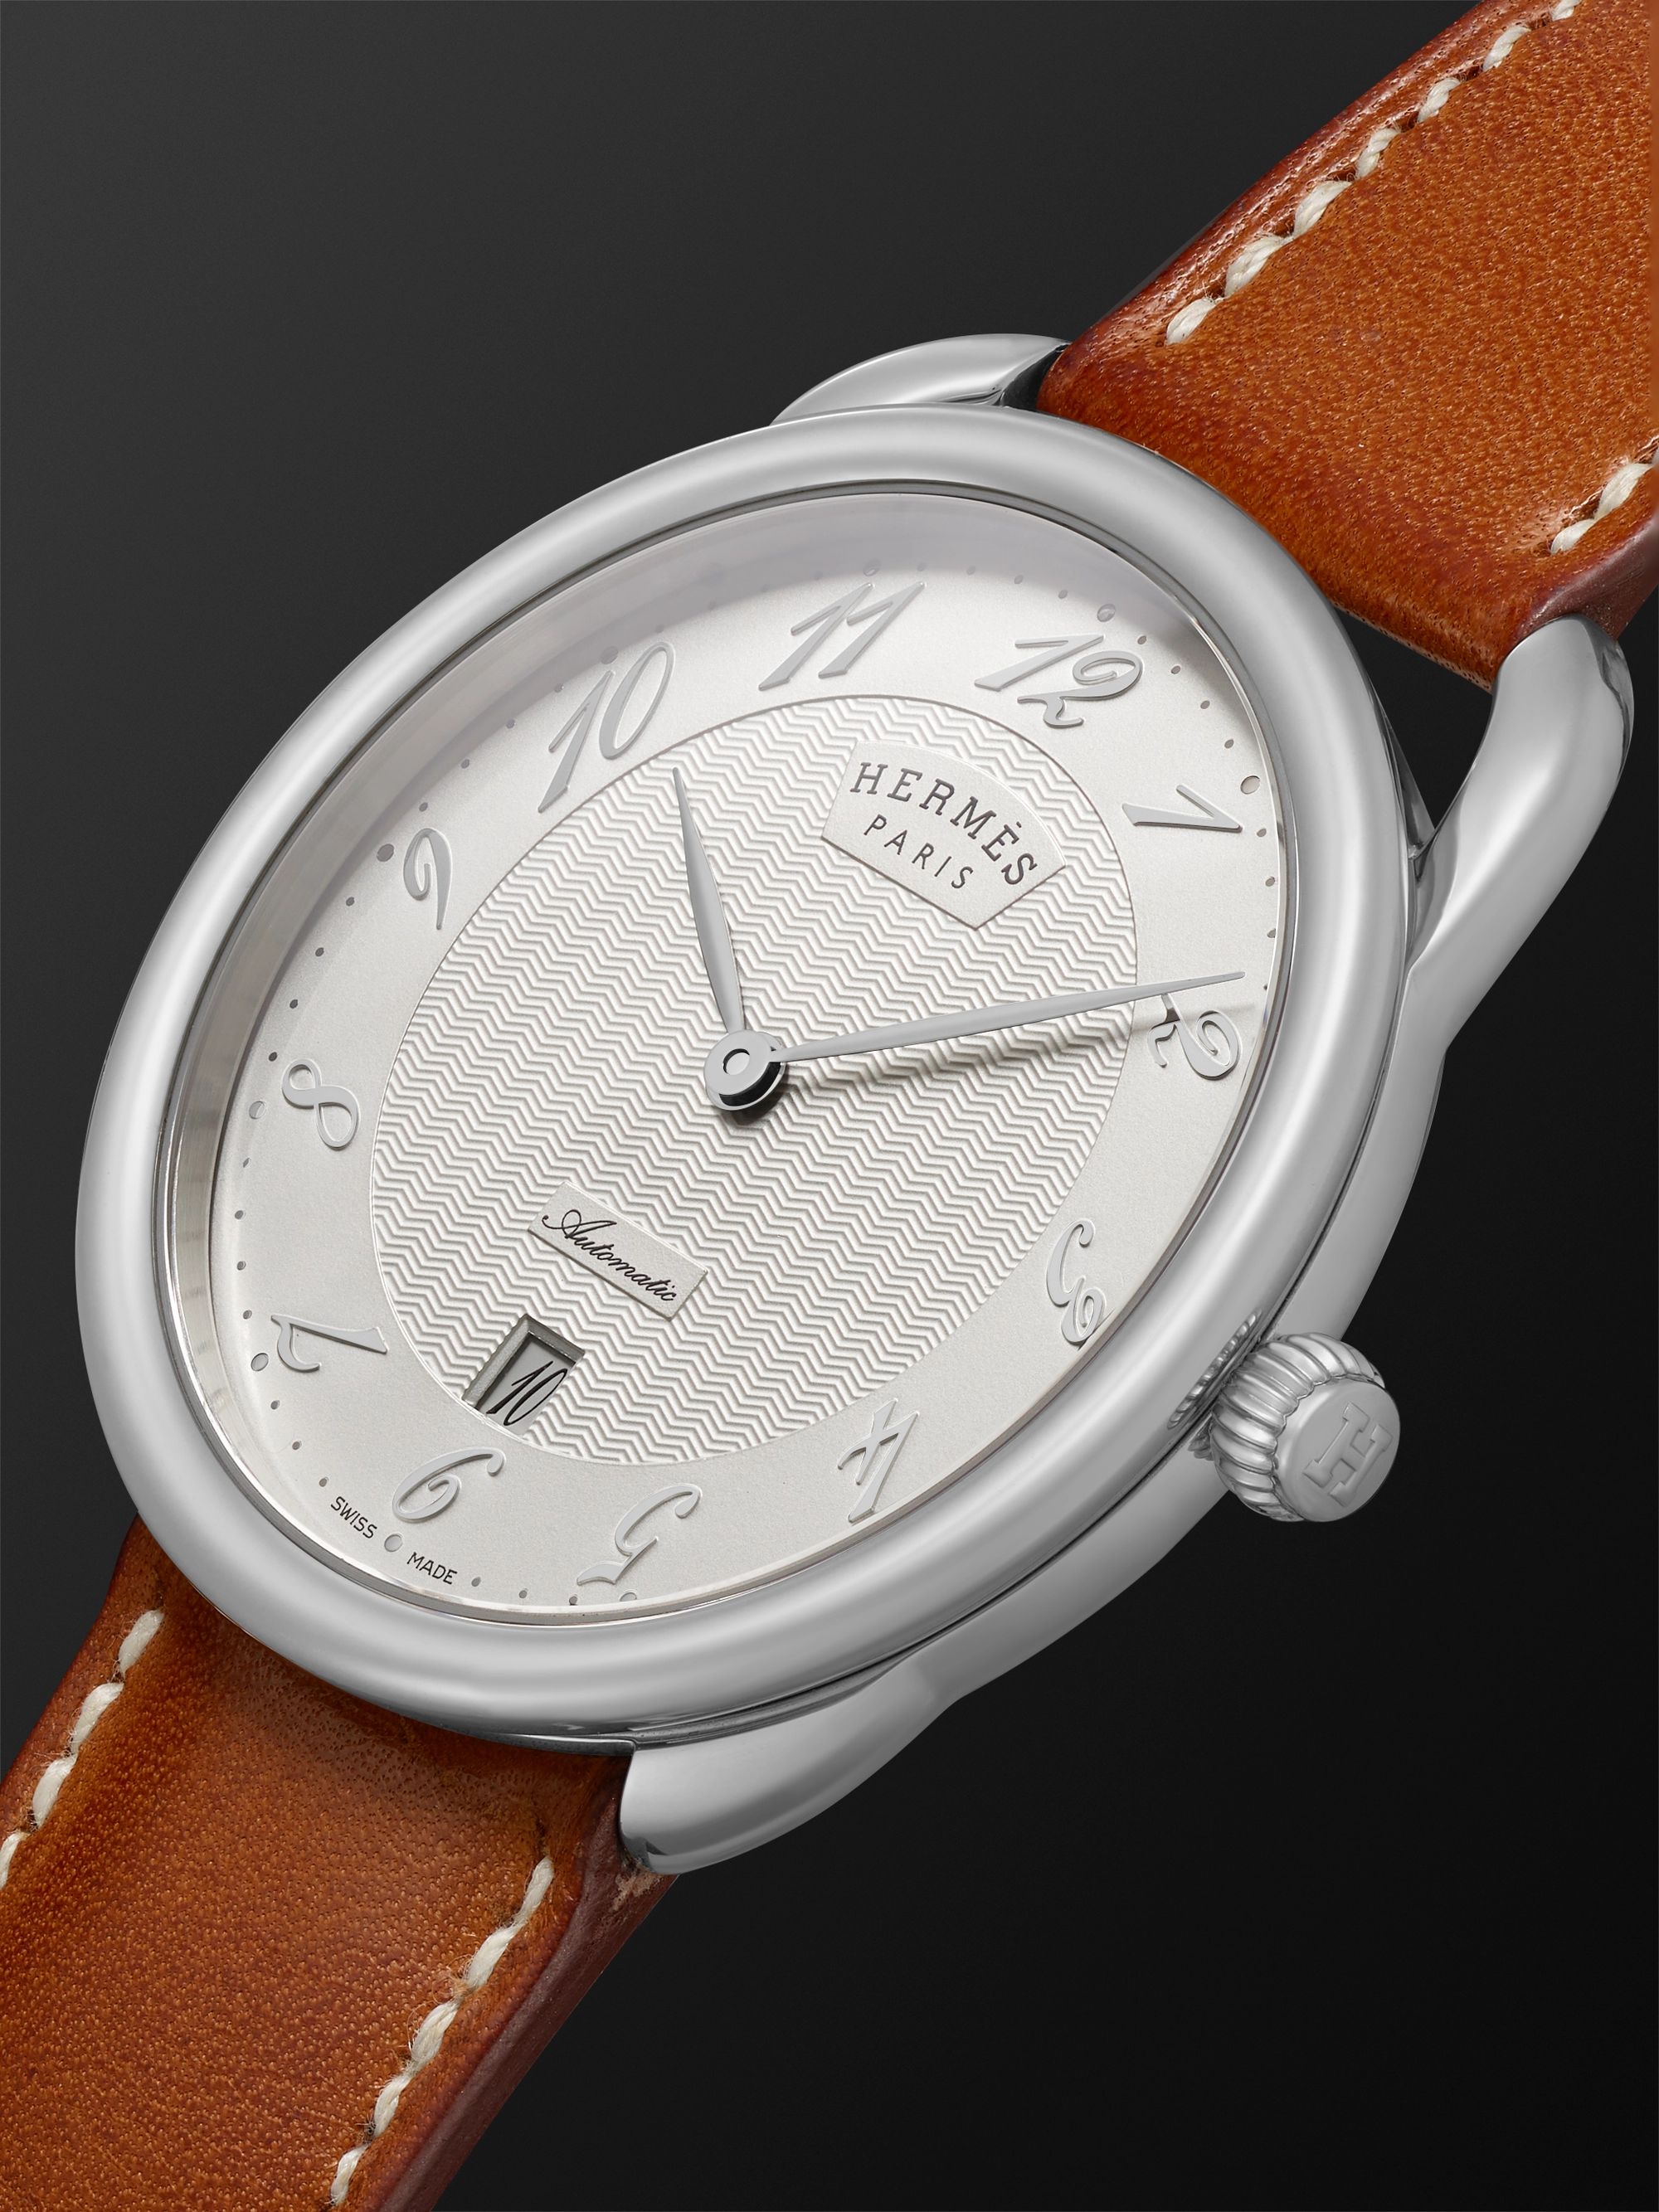 HERMÈS TIMEPIECES Arceau Automatic 40mm Stainless Steel and Leather Watch,  Ref. No. 055473WW00 | MR PORTER